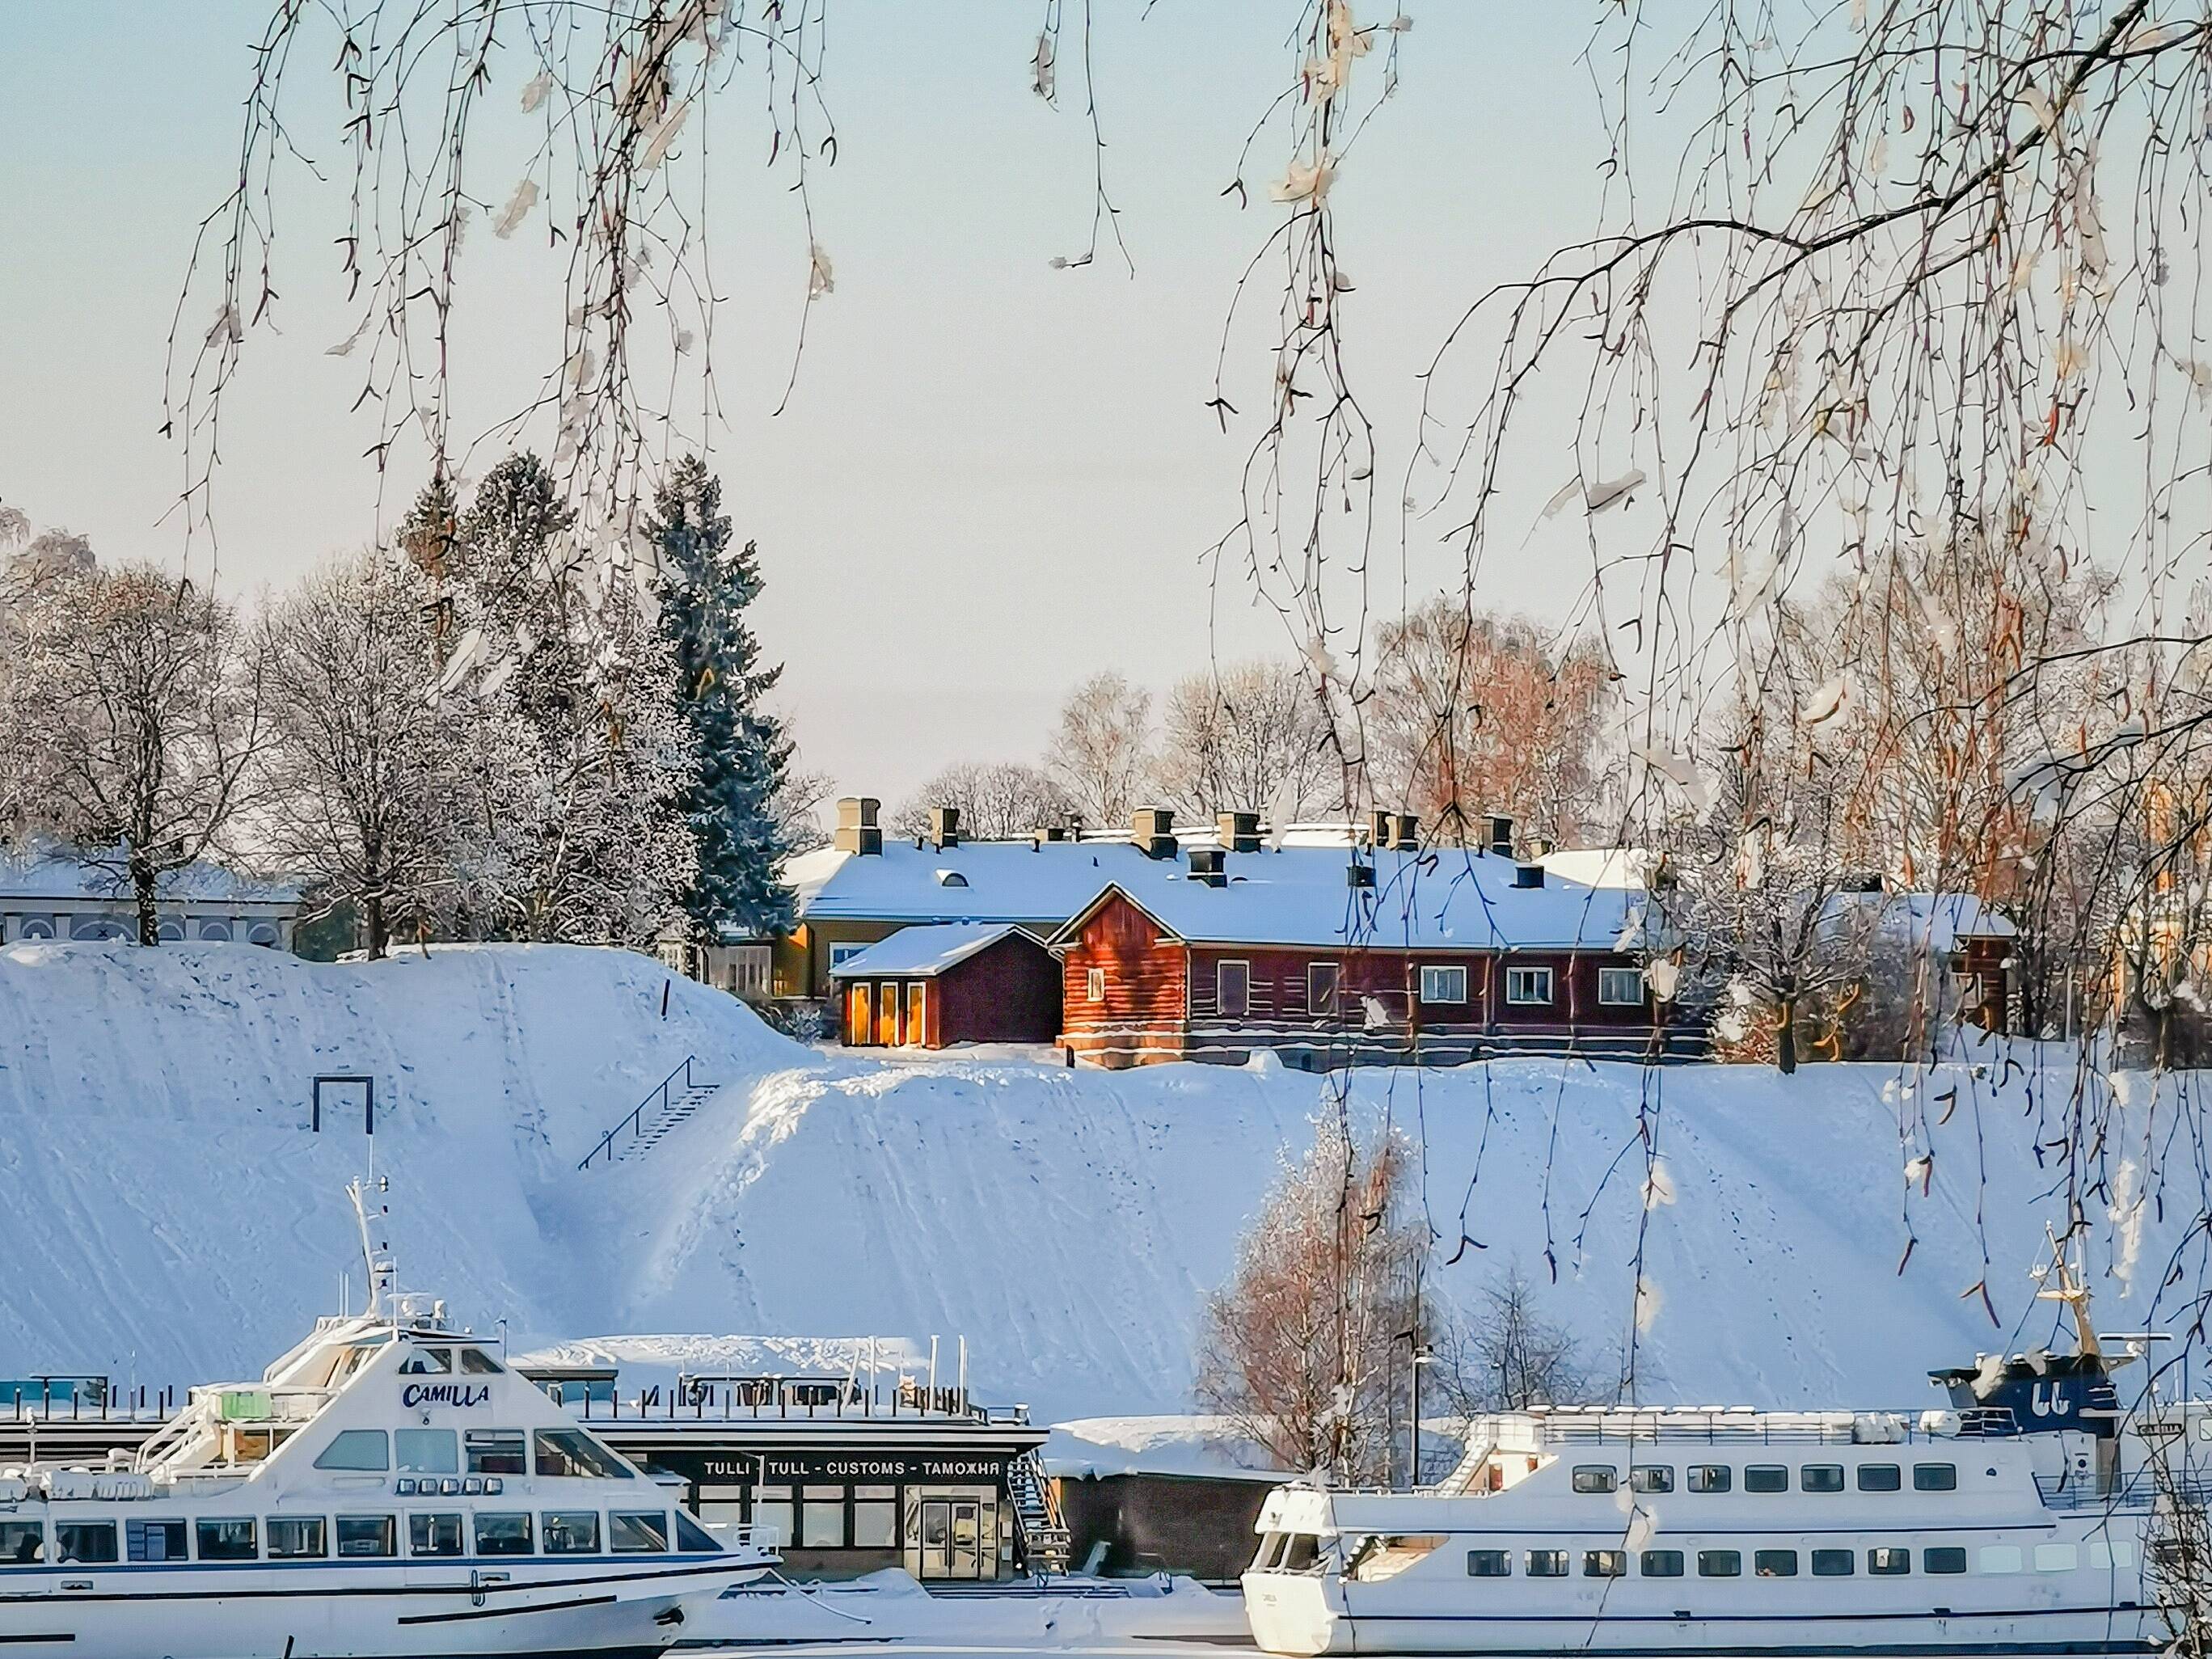 Ships and boats on a pier in snow-covered city of Lappeenranta.